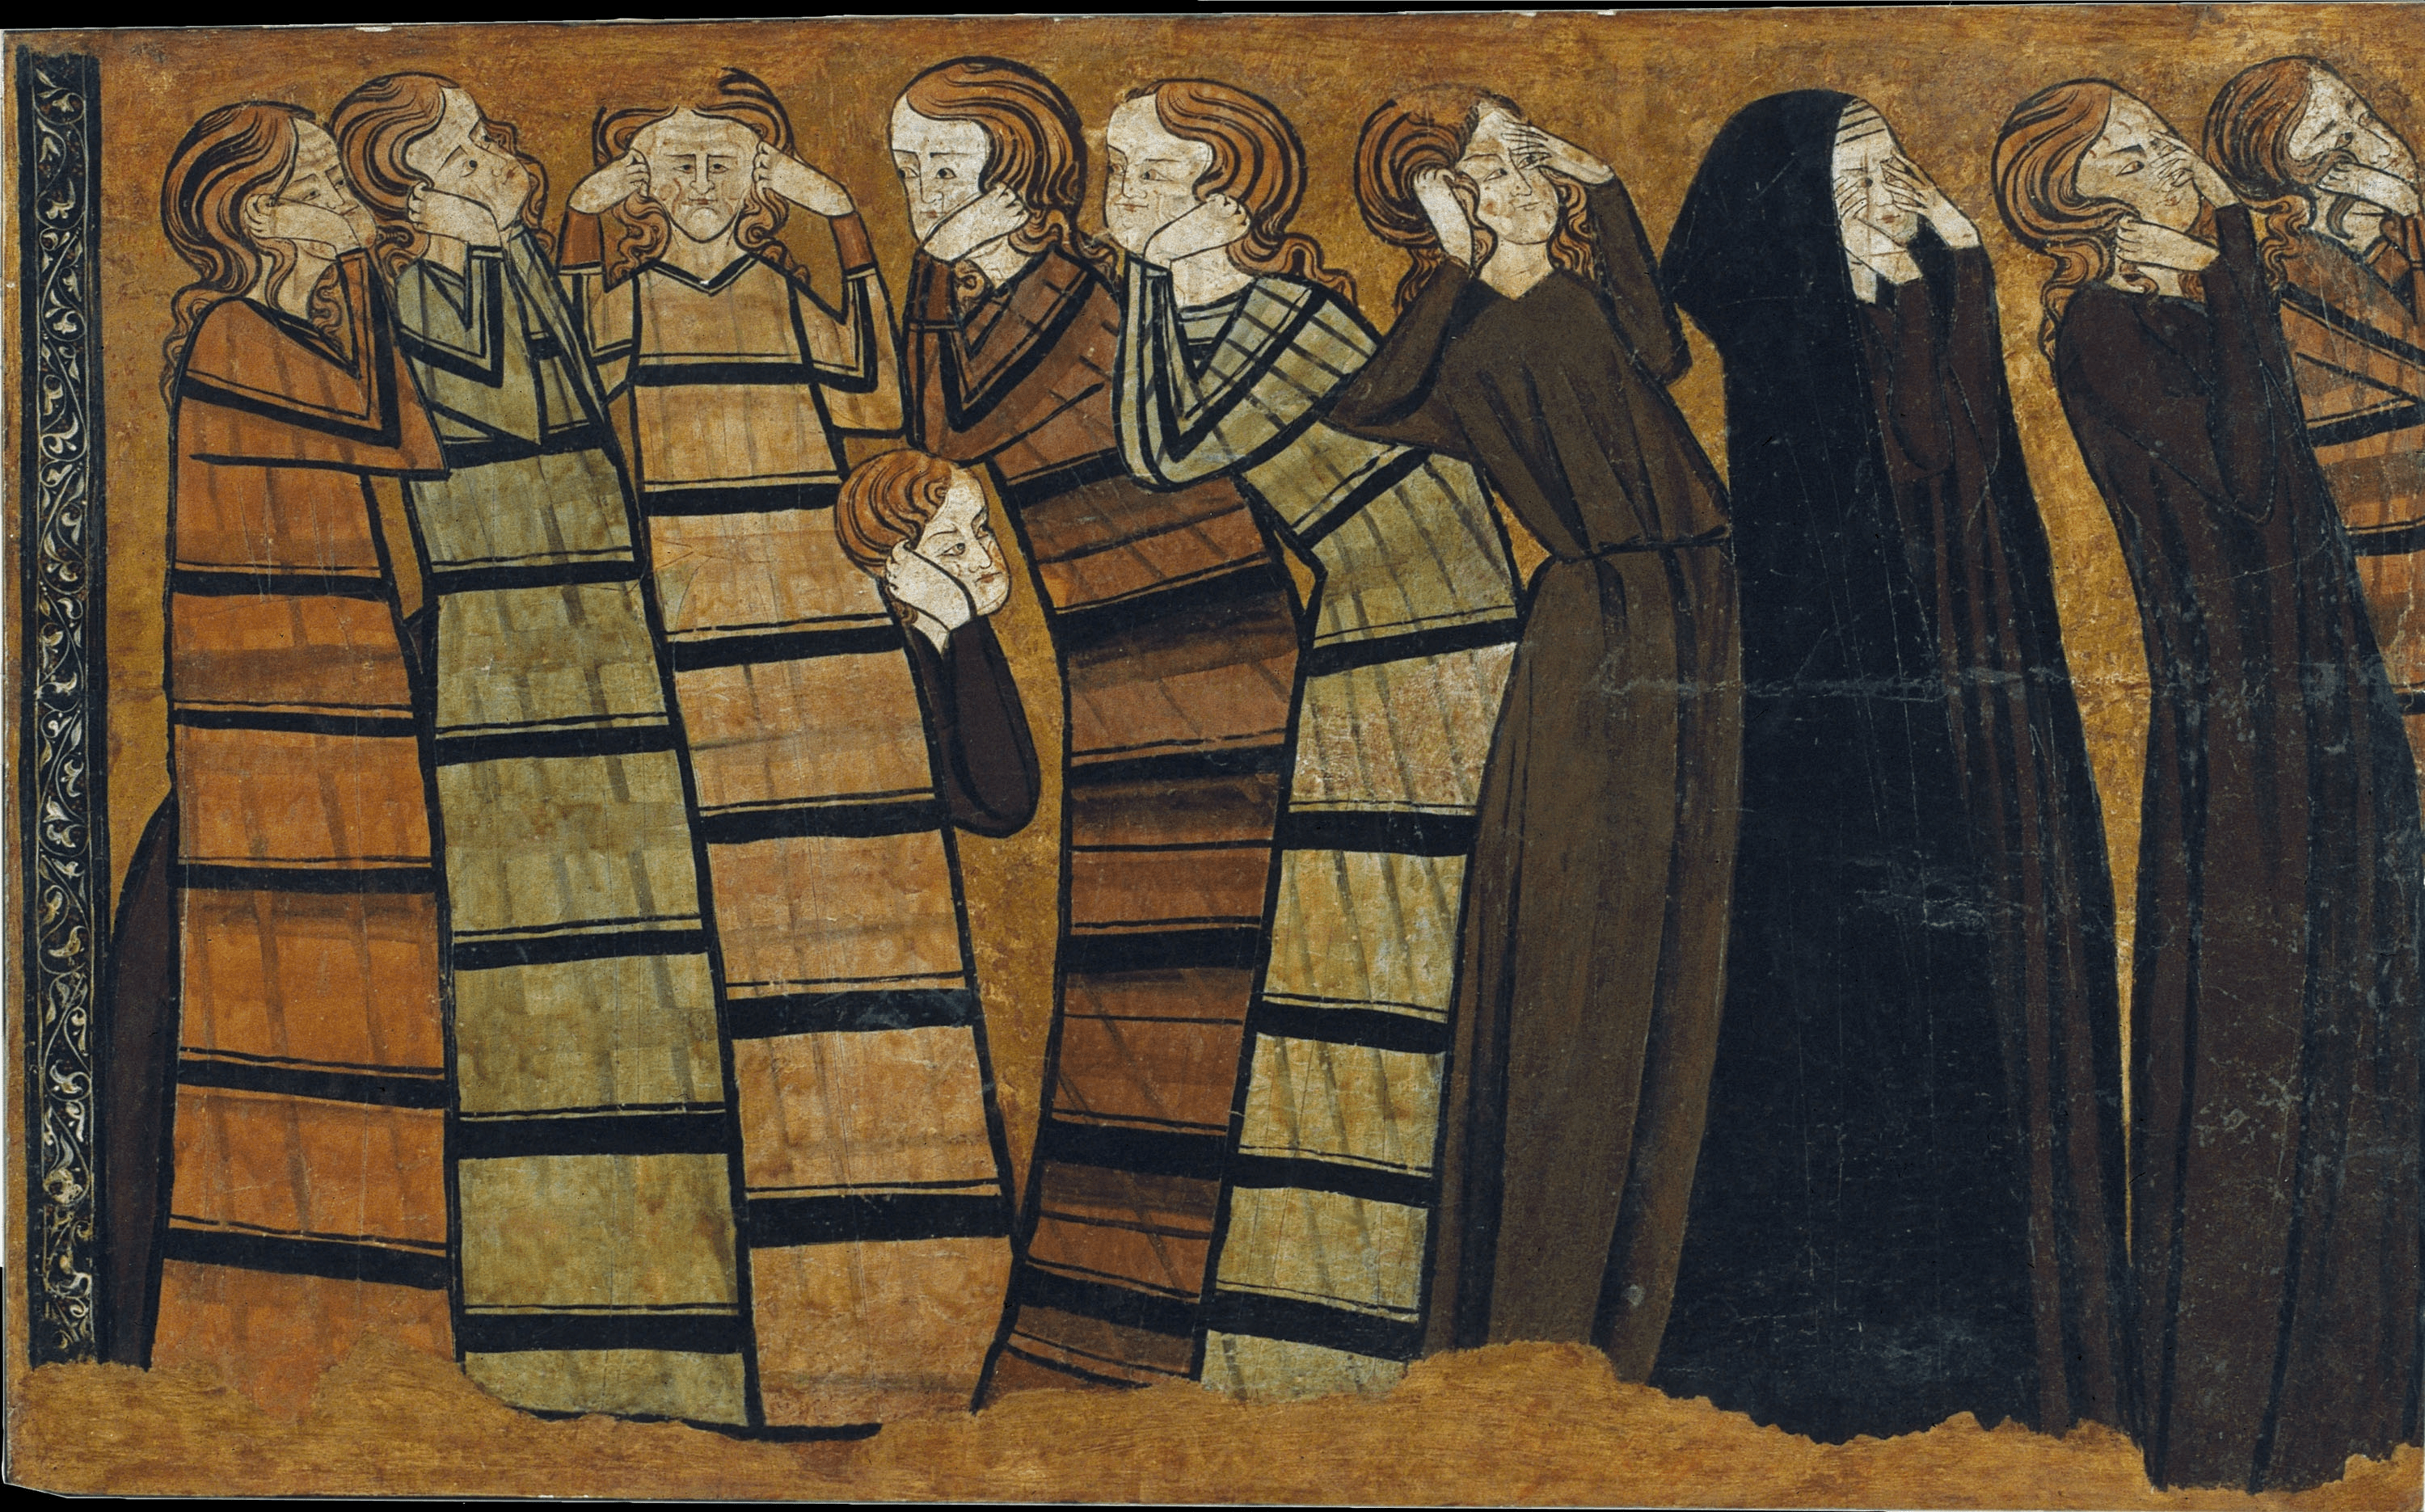 Mourners tearing their hair and faces in grief, c. 1295, Castile. 1 of 8 wooden panels originally in the chapel of San Andrés de Mahamud (Burgos). The Plañideros panels are currently in Sala 19 of the Museu Nacional d’Art de Cataluyna, in Barcelona, catalog numbers 004372-003, 004372-004, 004372-005, and 004372-006.